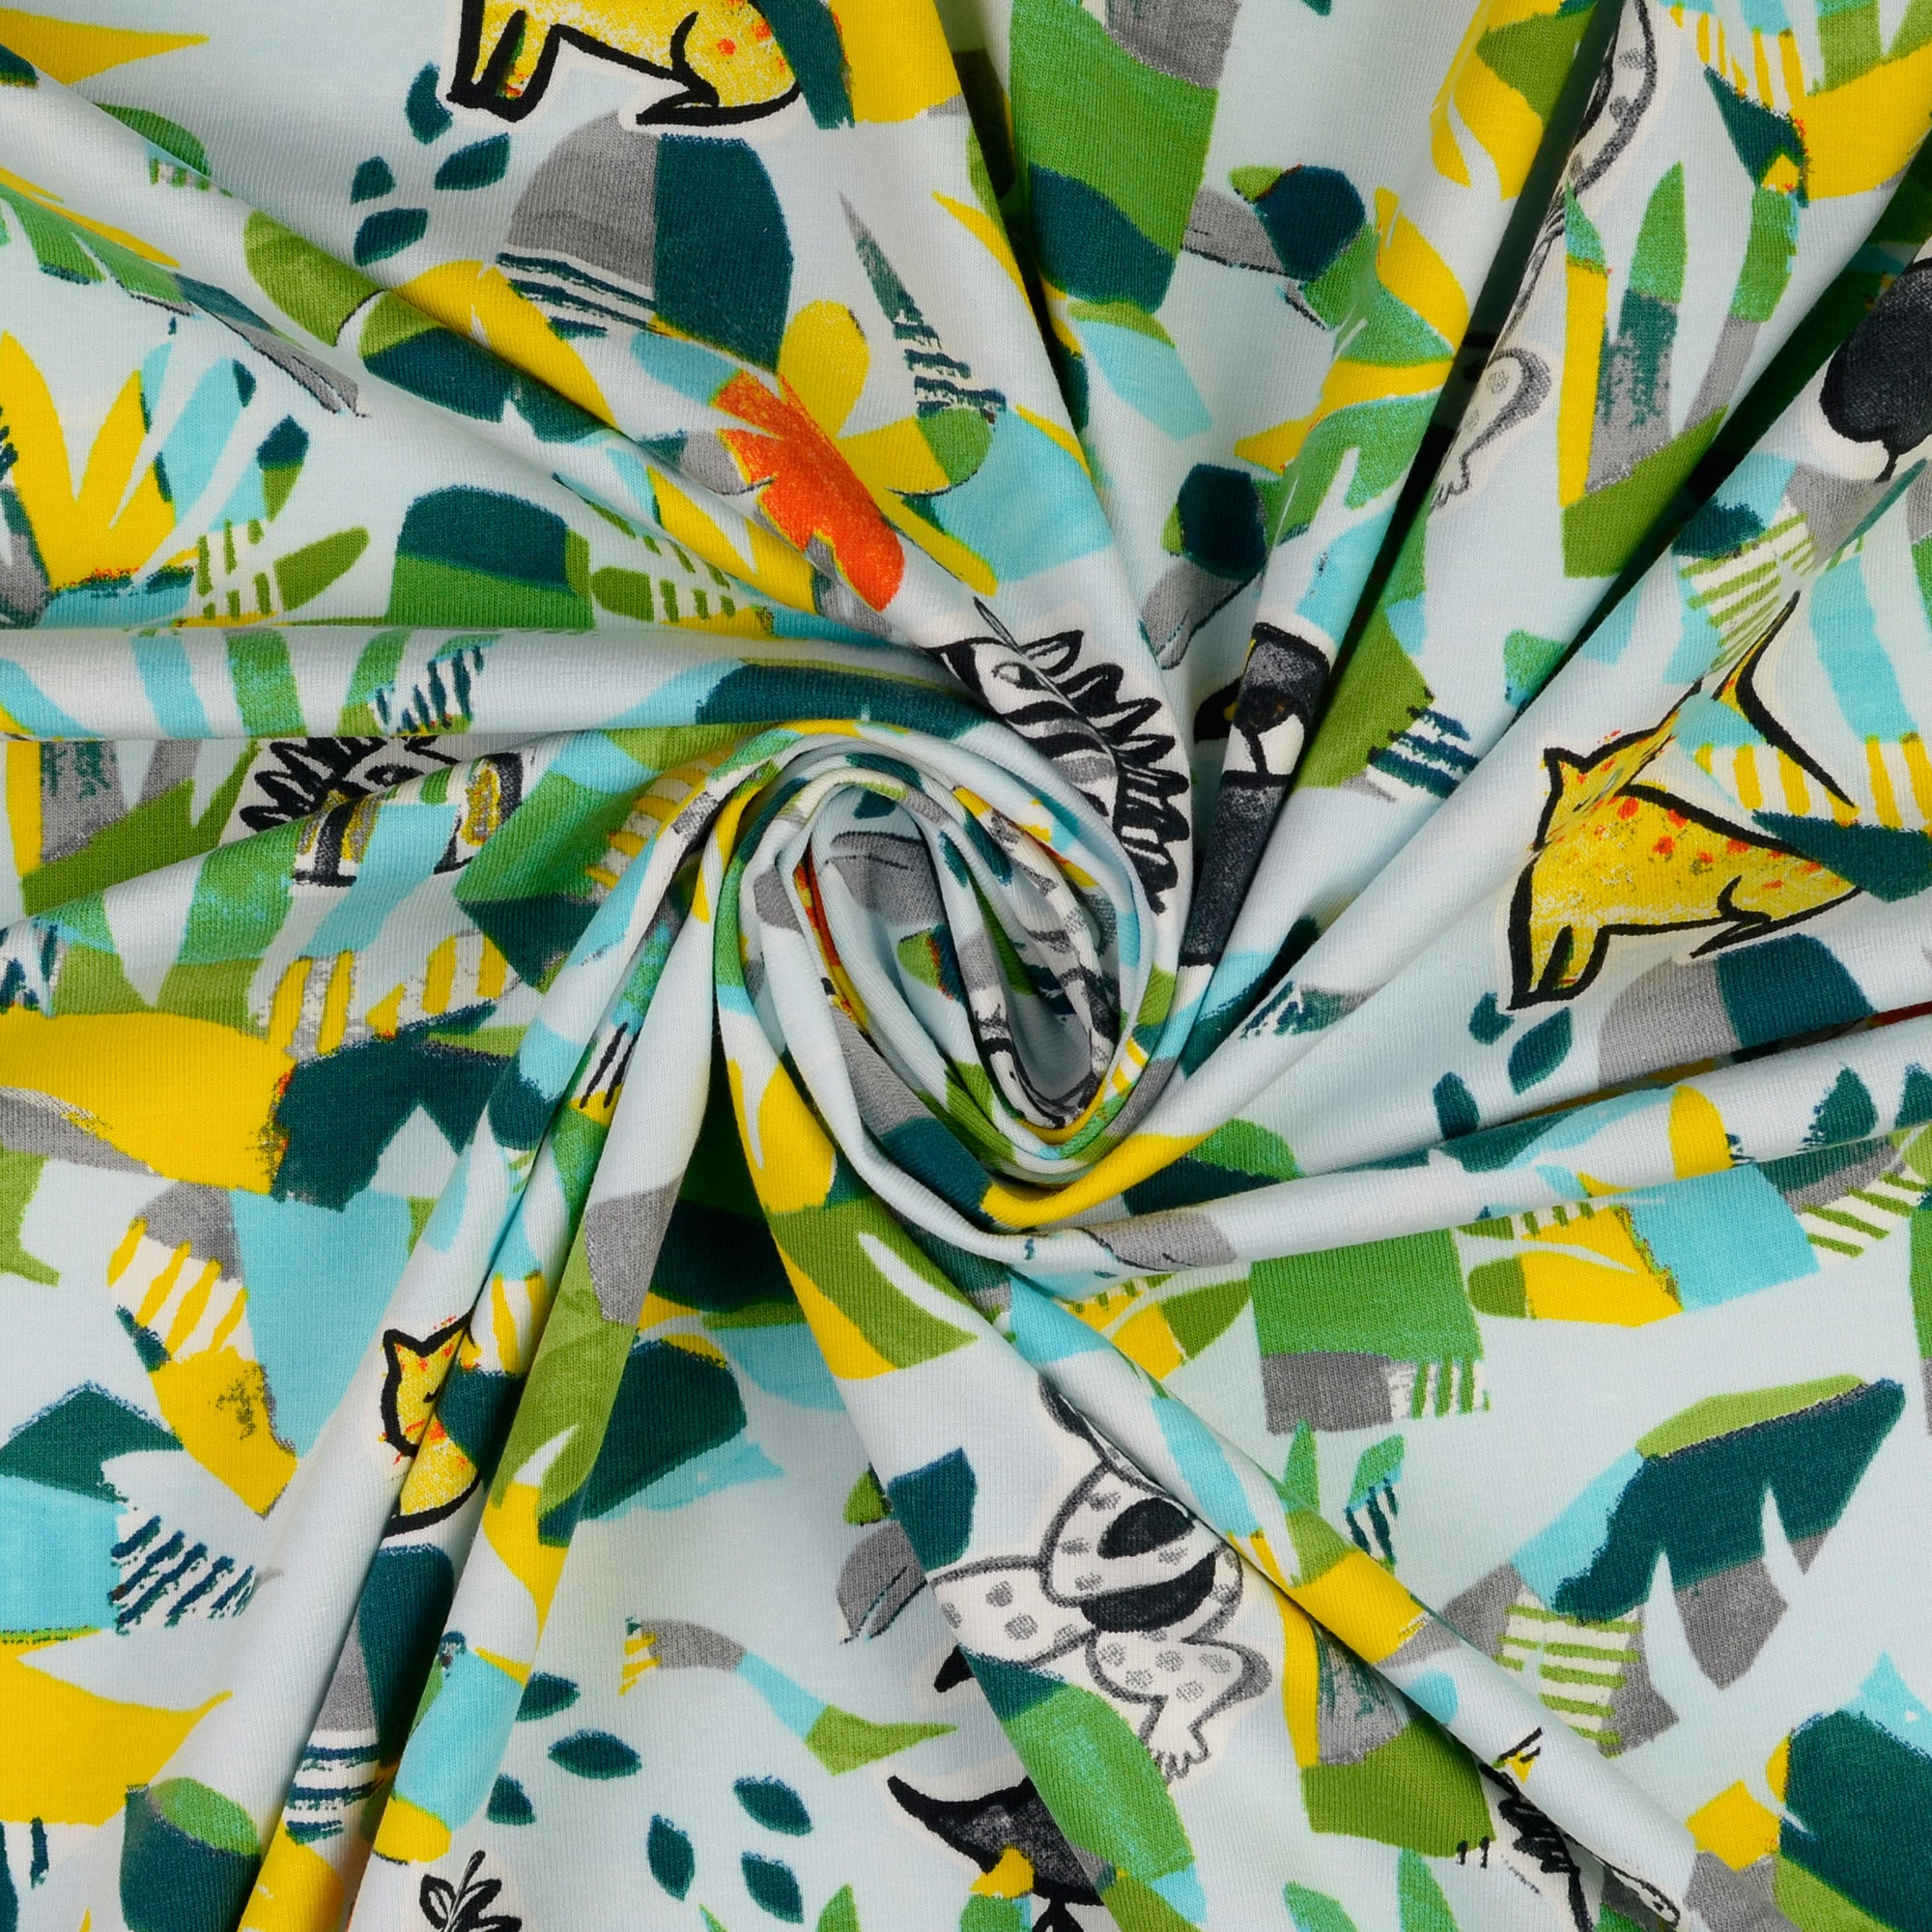 REMNANT 1.54 Metres - Jungle Green Cotton Jersey Fabric